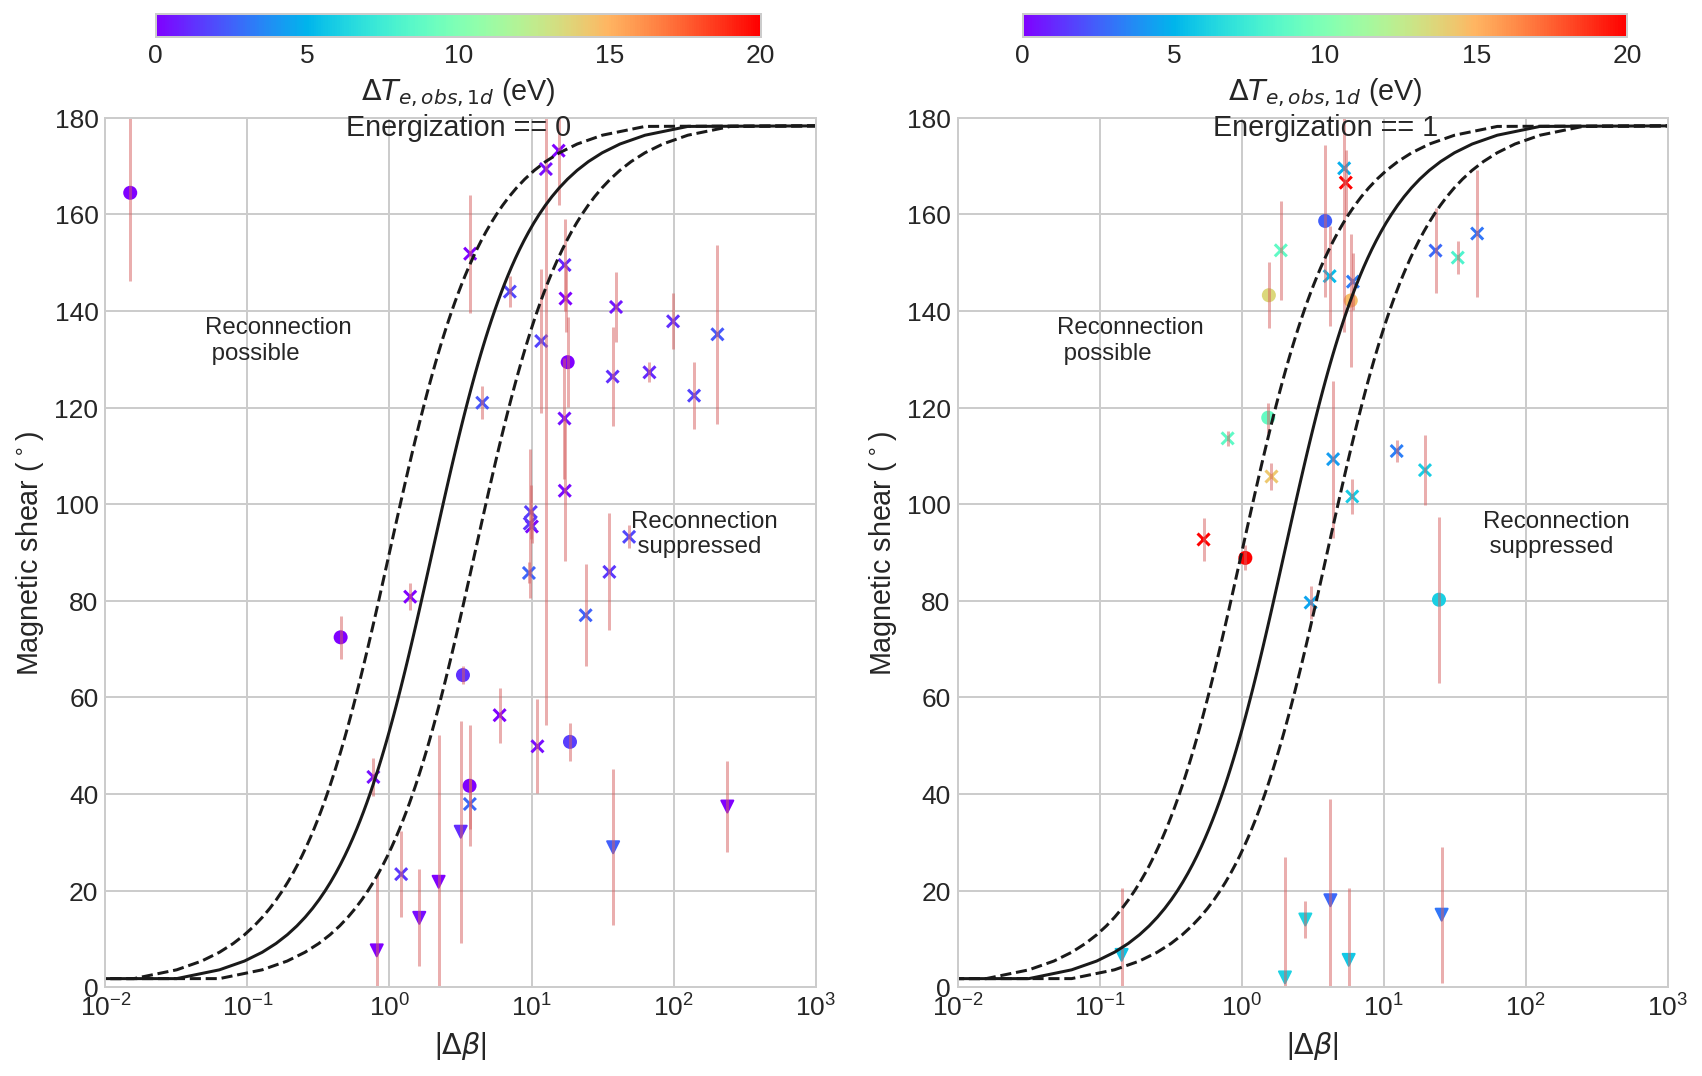 Plots showing magnetic shear as a function of delta-beta, showing where events lie in this parameter space. Regions where reconnection is possible and reconnection is suppressed are marked. Two cases are shown: with and without energisation. The plots show the points lying in the suppressed reconnection when there is not energisation. More points lie in the possible reconnection region when there is energisation.